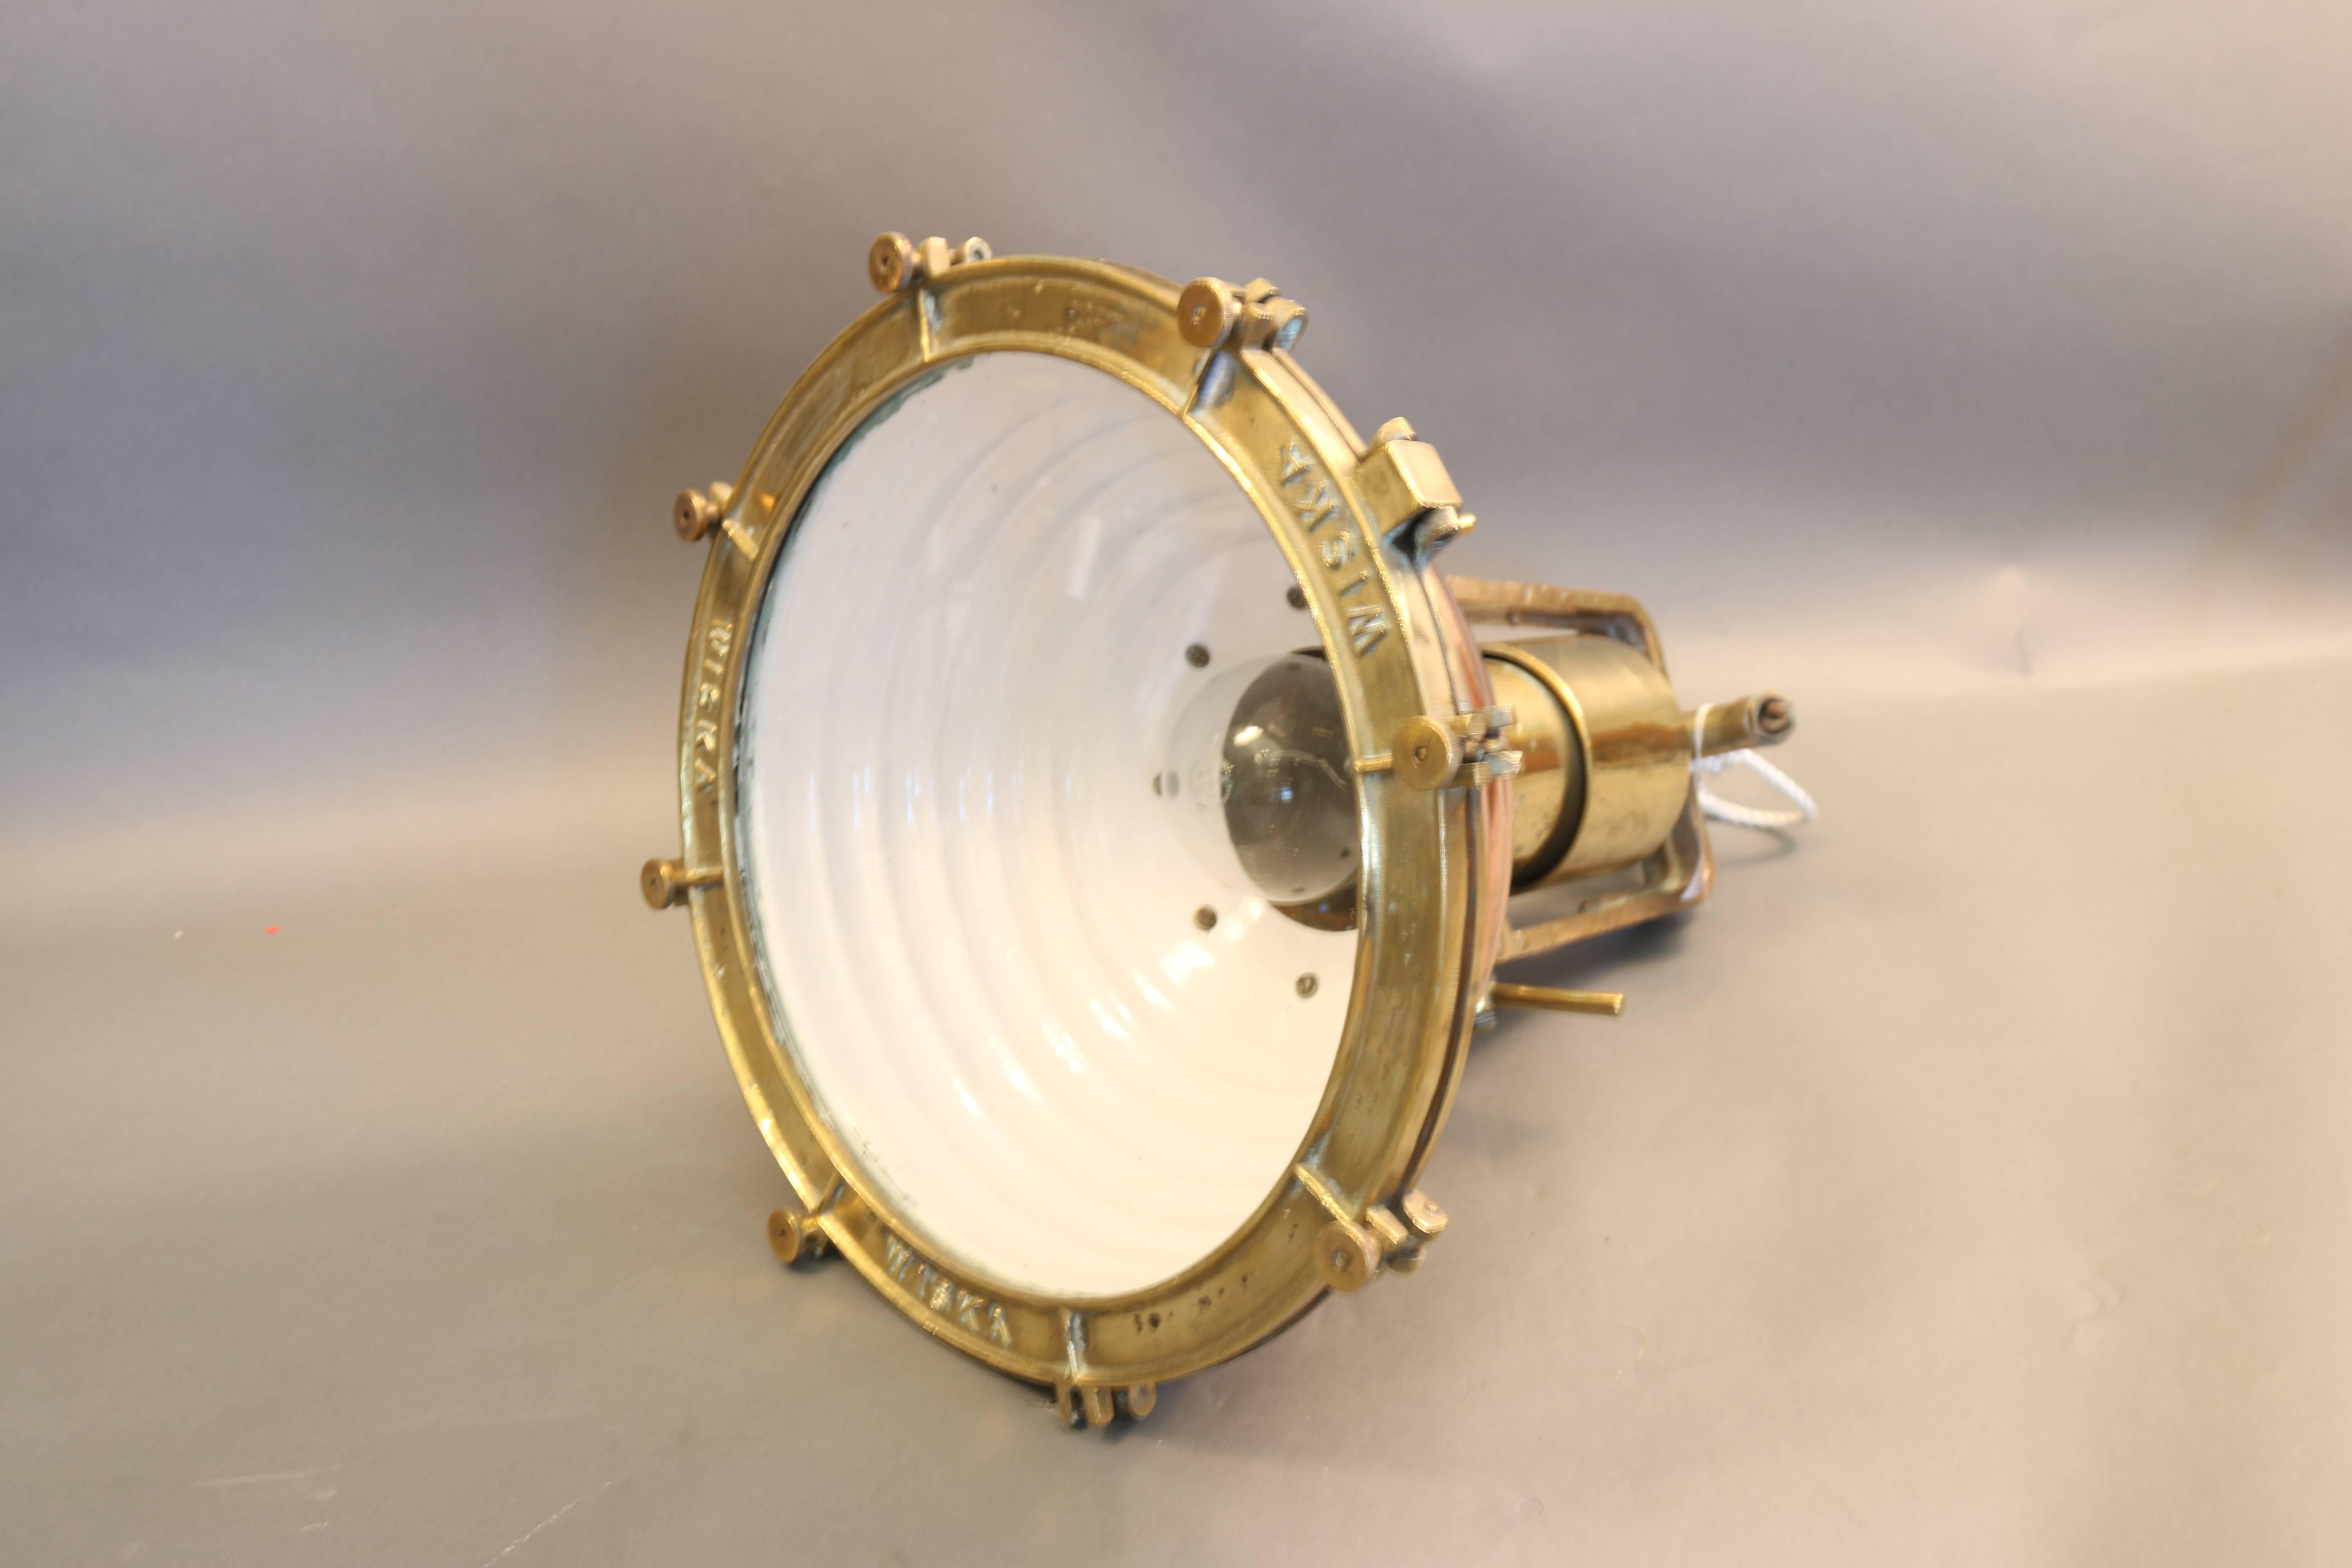 Ship's cargo light with ripped copper housing, brass bezel and glass lens. Fitted with a sturdy brass mounting yoke. 